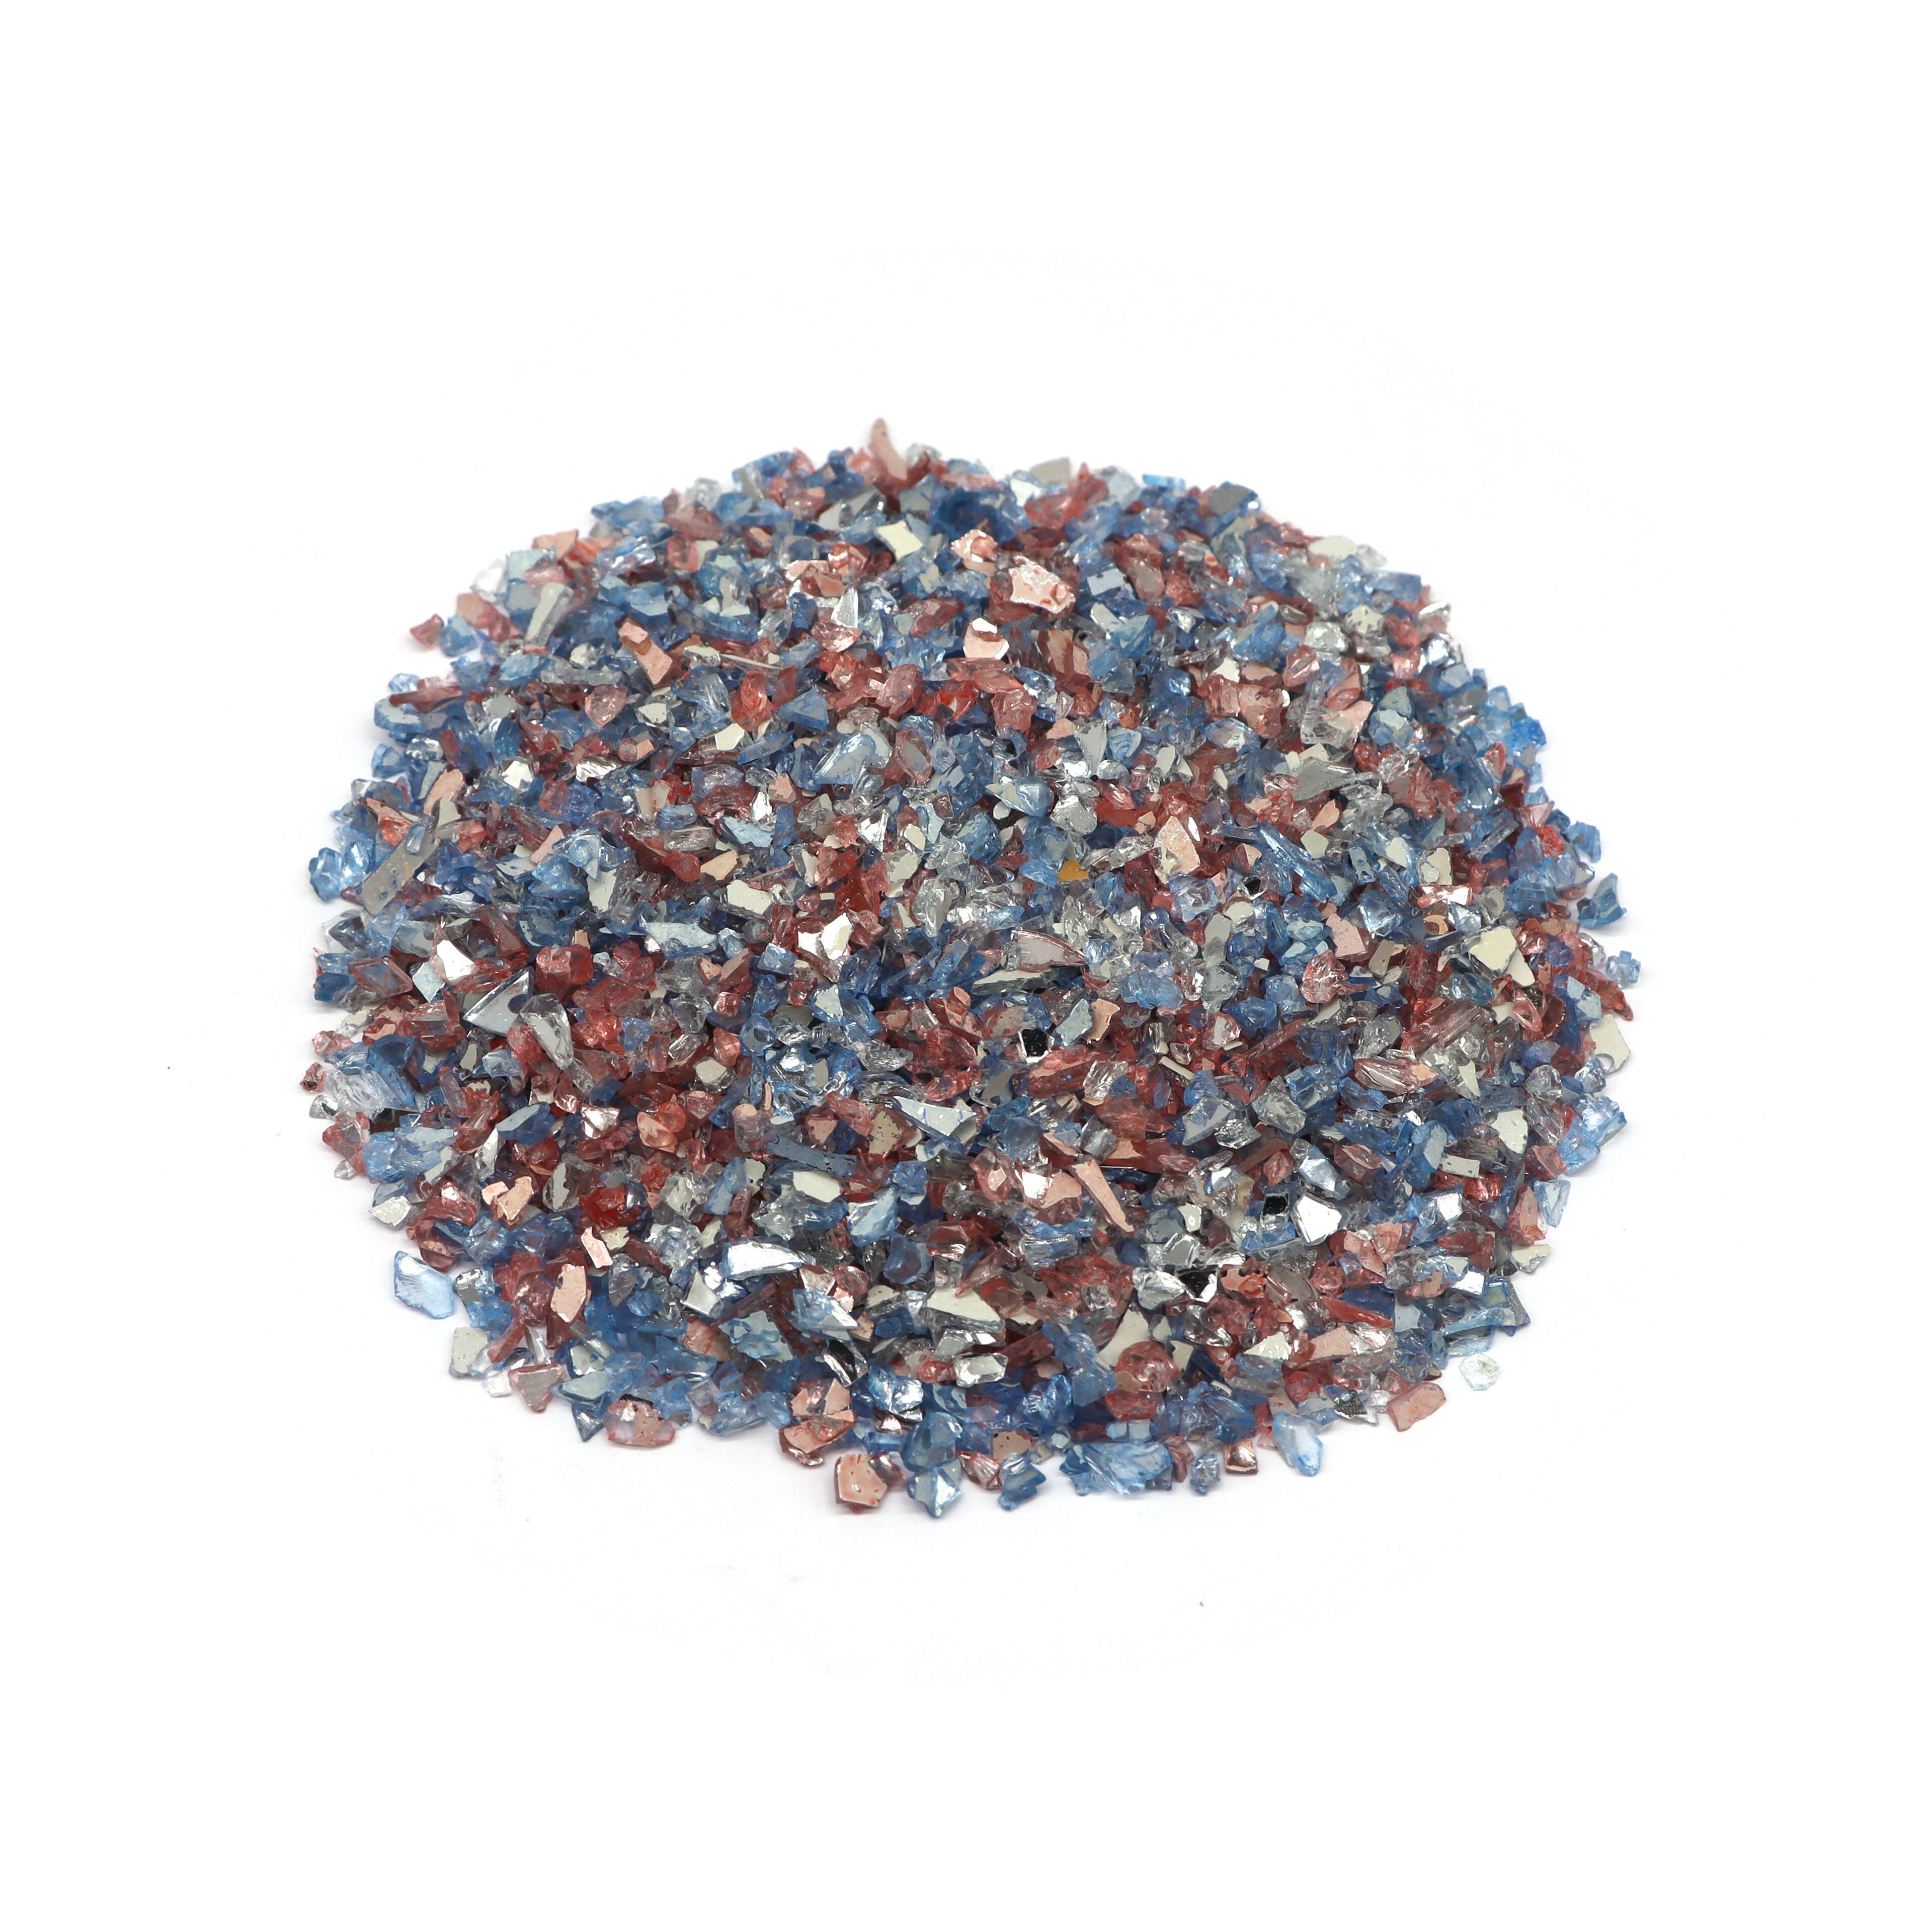 Pink & Blue Crushed Glass Filler by Ashland® | Michaels